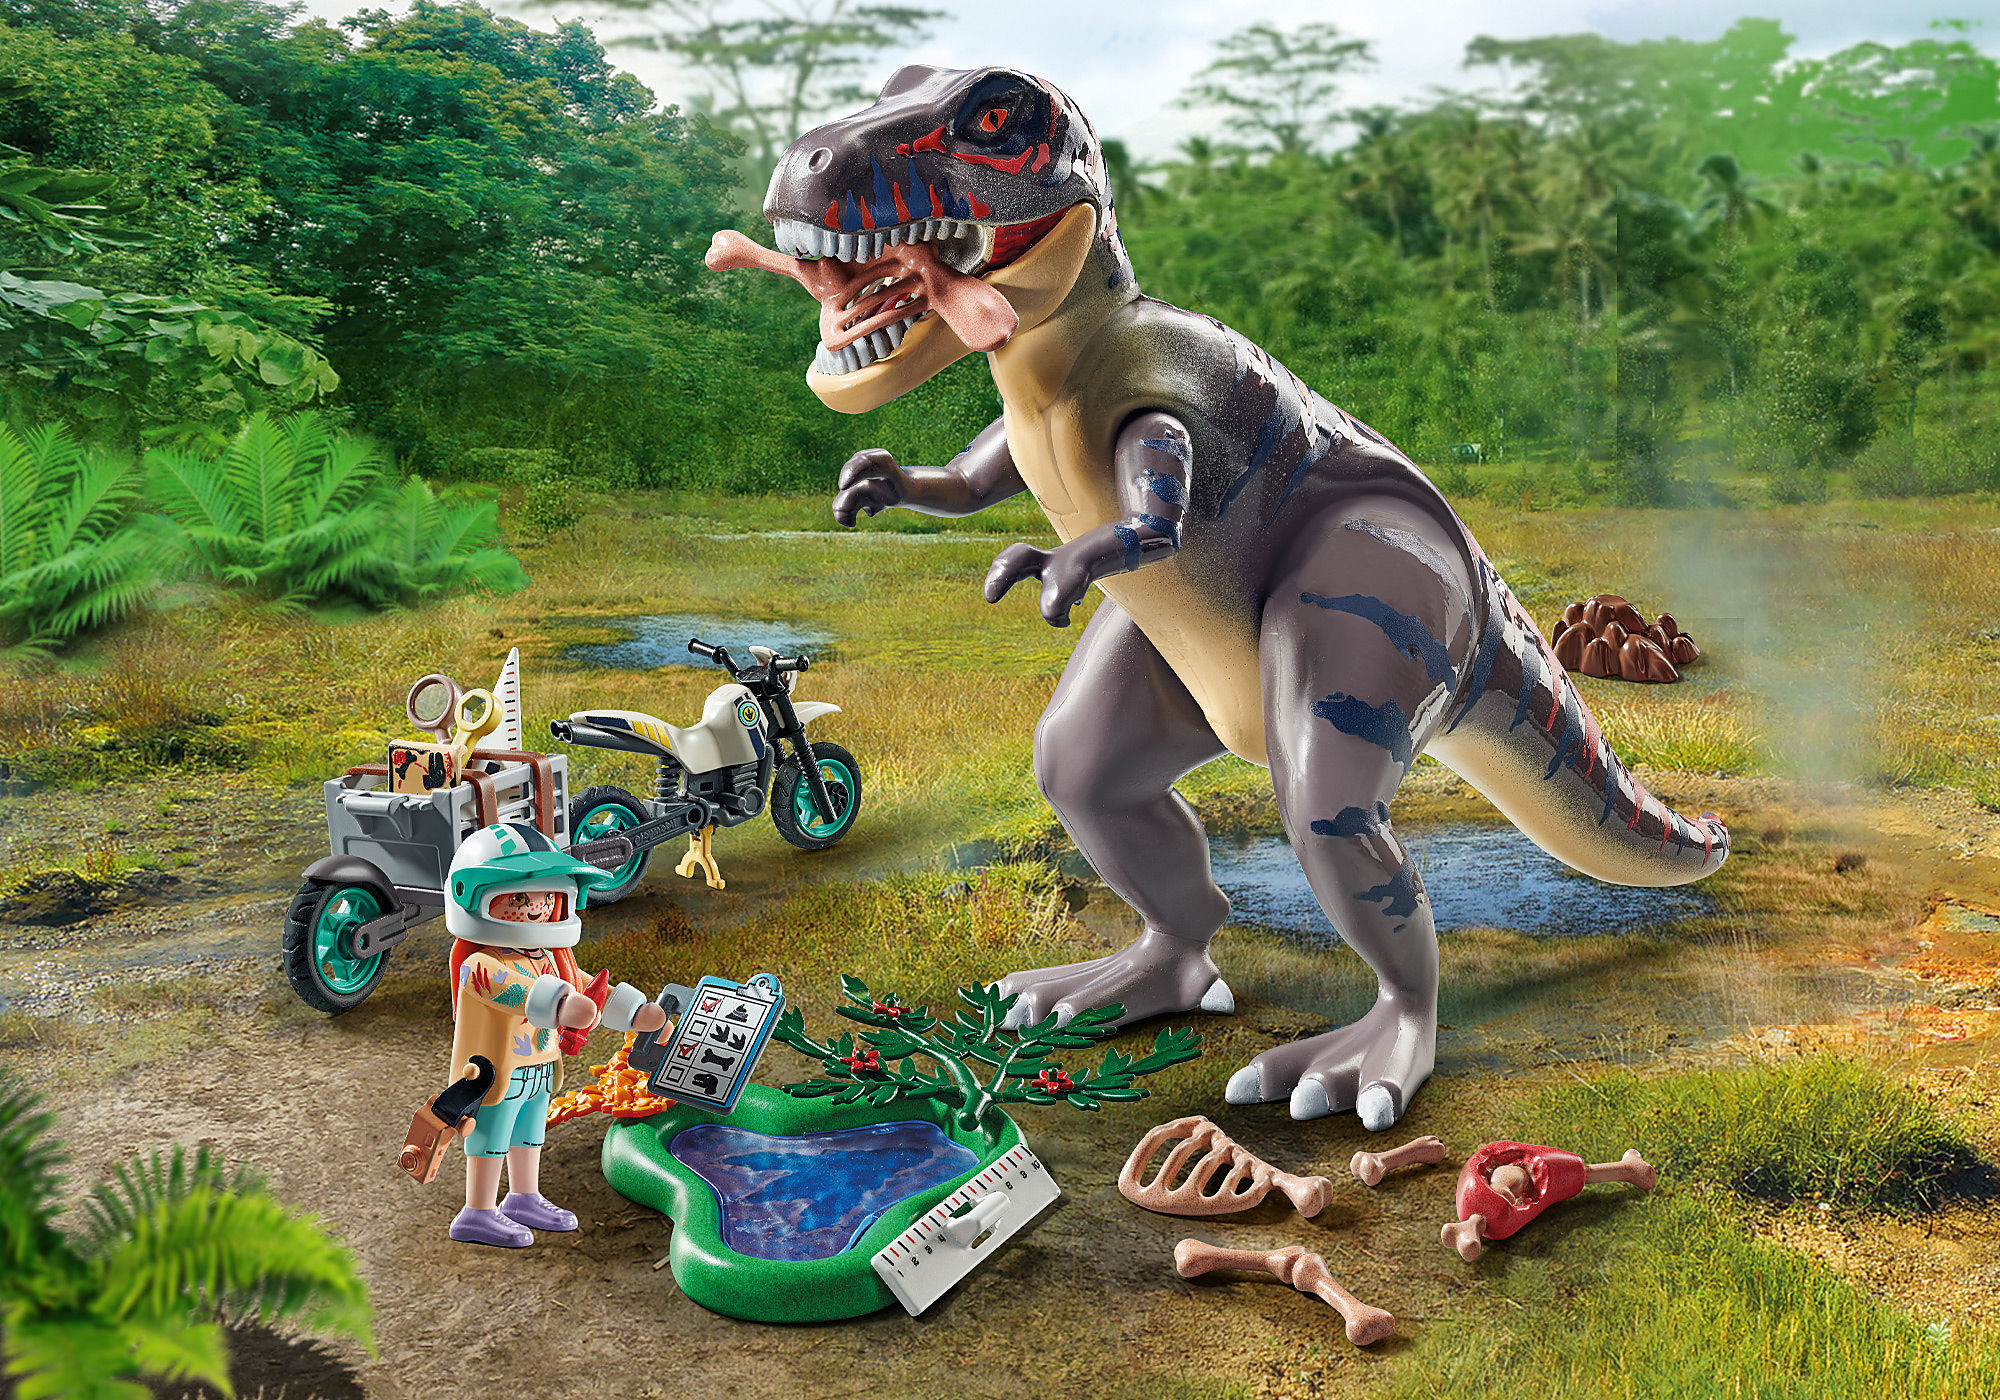 Dino Expedition with Amphibious Vehicle - Playmobil dinosaures 5019